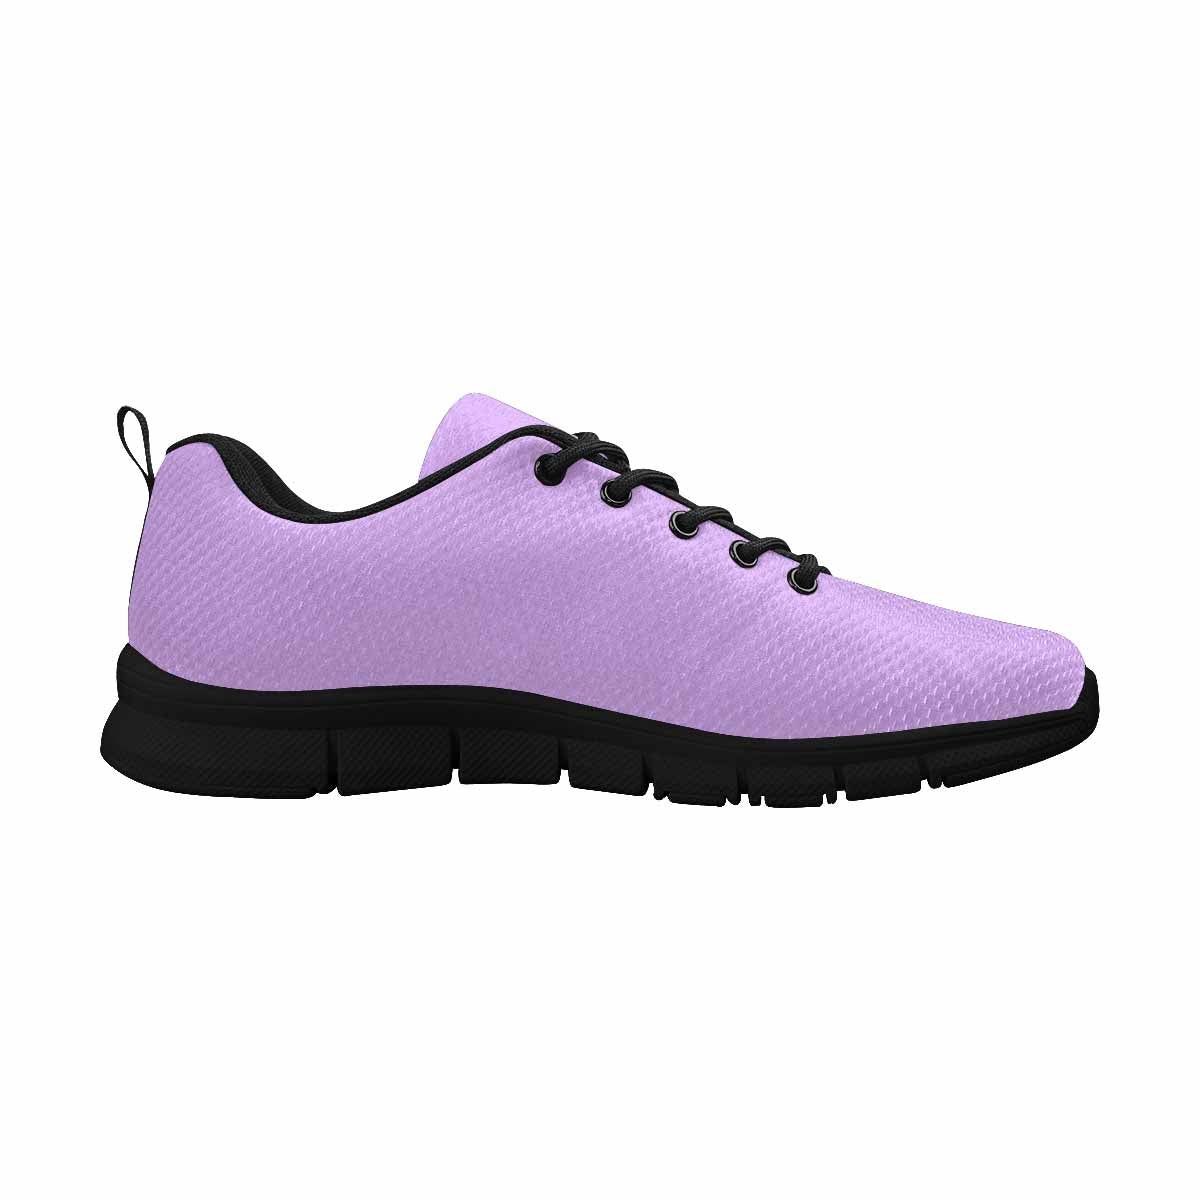 Sneakers For Men, Mauve Purple Running Shoes